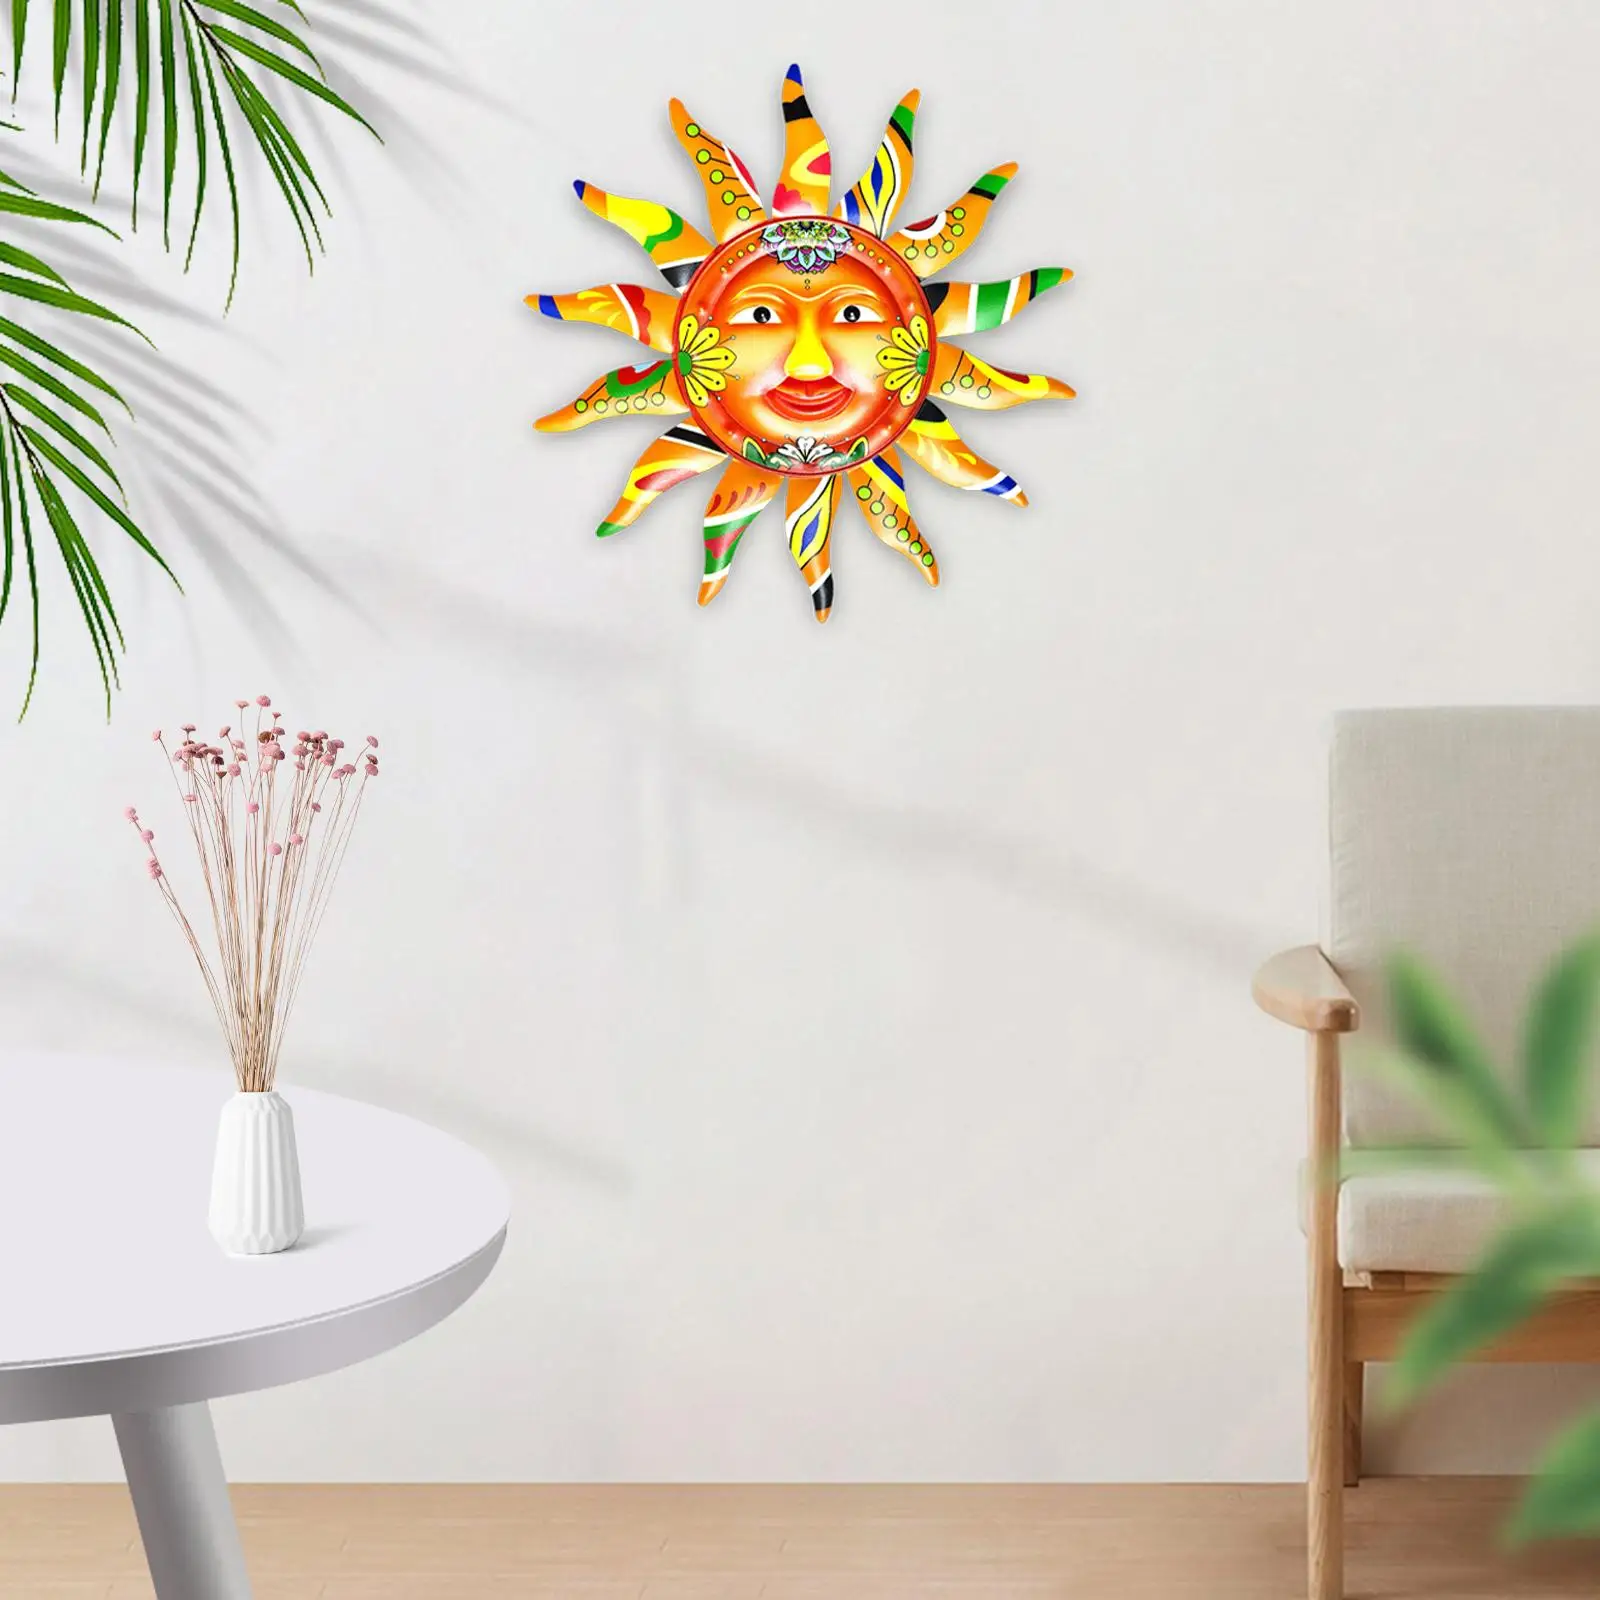 Metal Sun Wall Decor Hanging Artistic Wall Sculpture for Home Fence Bedroom